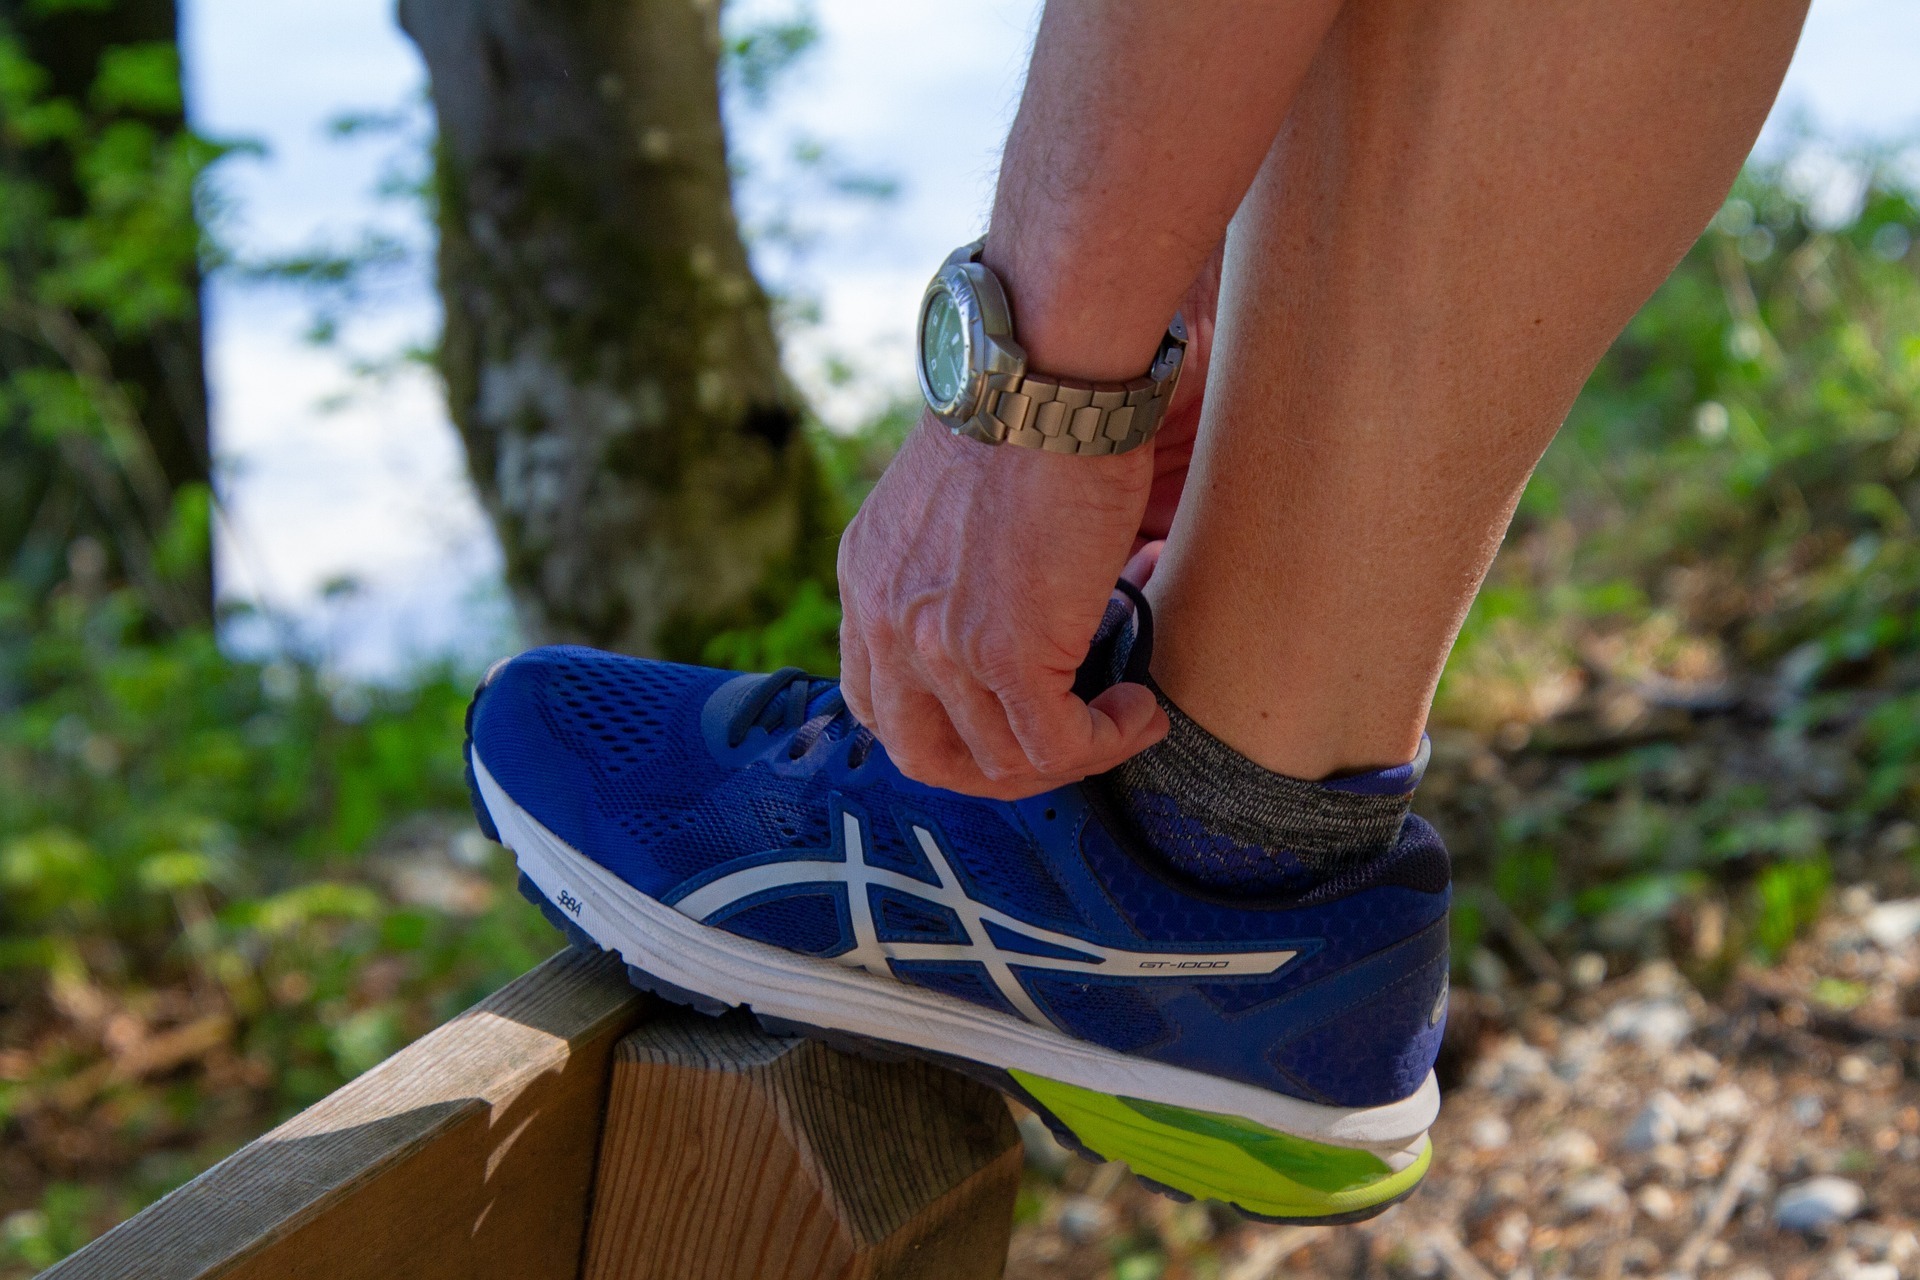 A person adjusting their running shoes